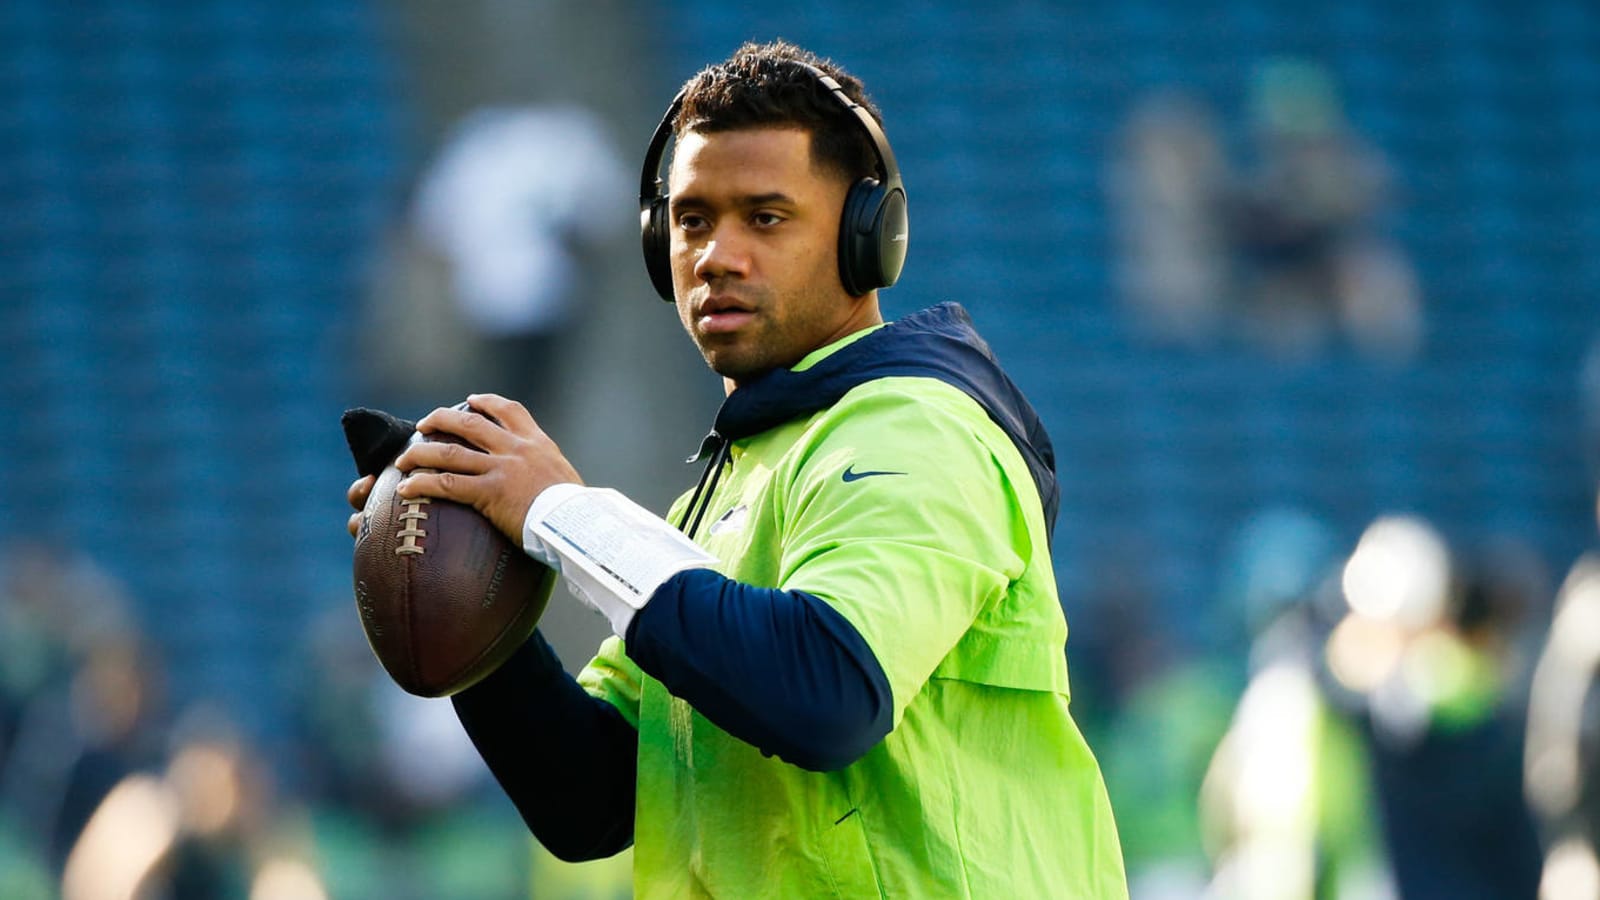 Russell Wilson 'pretty dang close' to 100 percent healthy